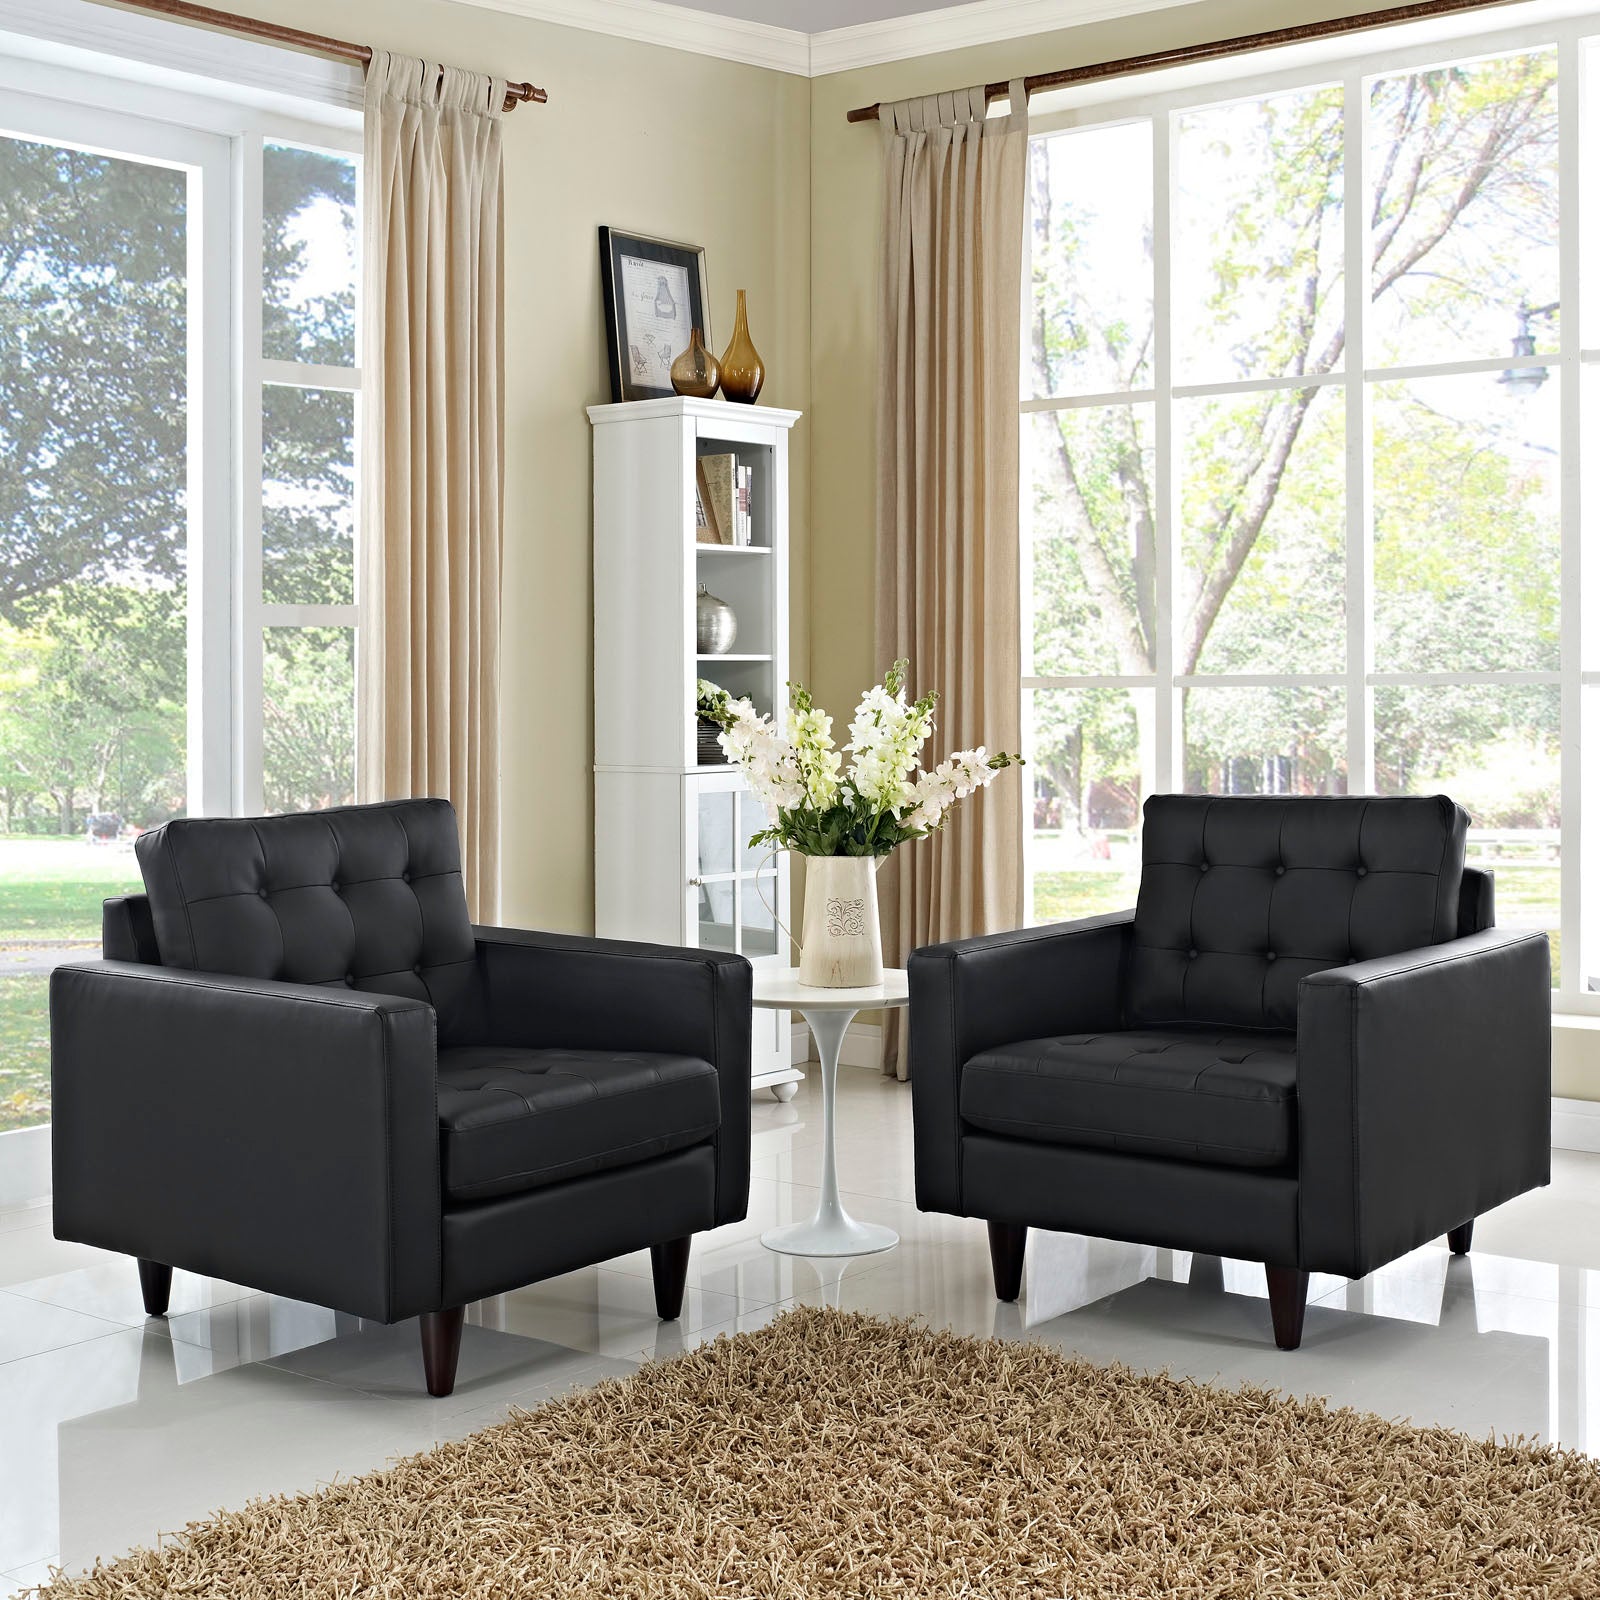 Empress Armchair Leather Set of 2 - East Shore Modern Home Furnishings